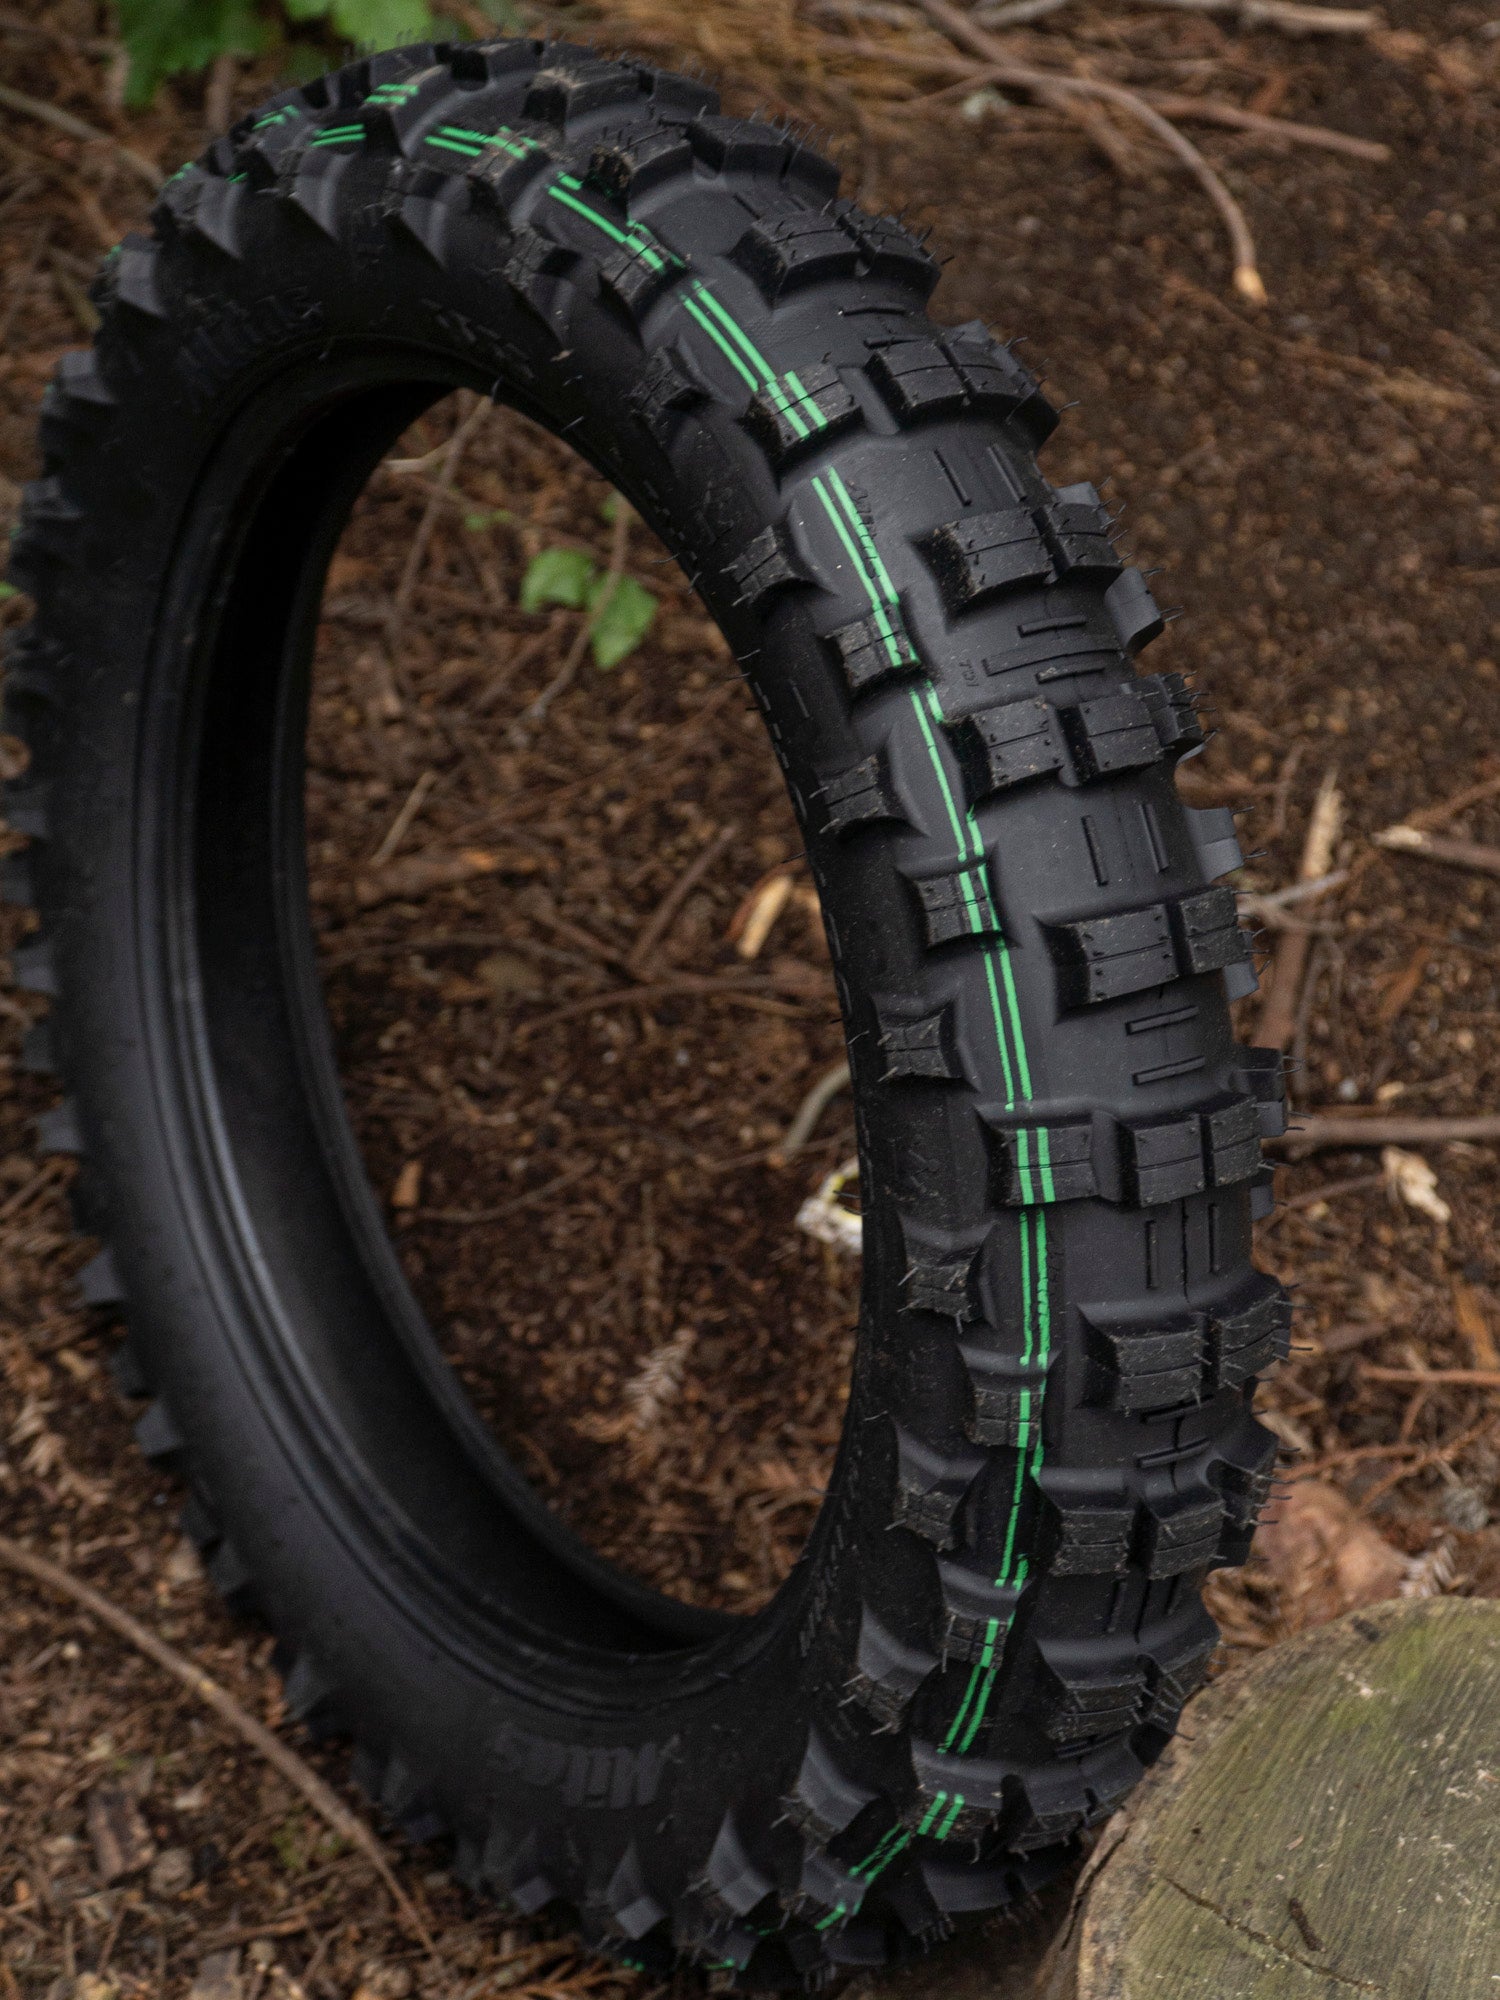 Mitas Terra Force EH Double Green Gummy Rear Tire